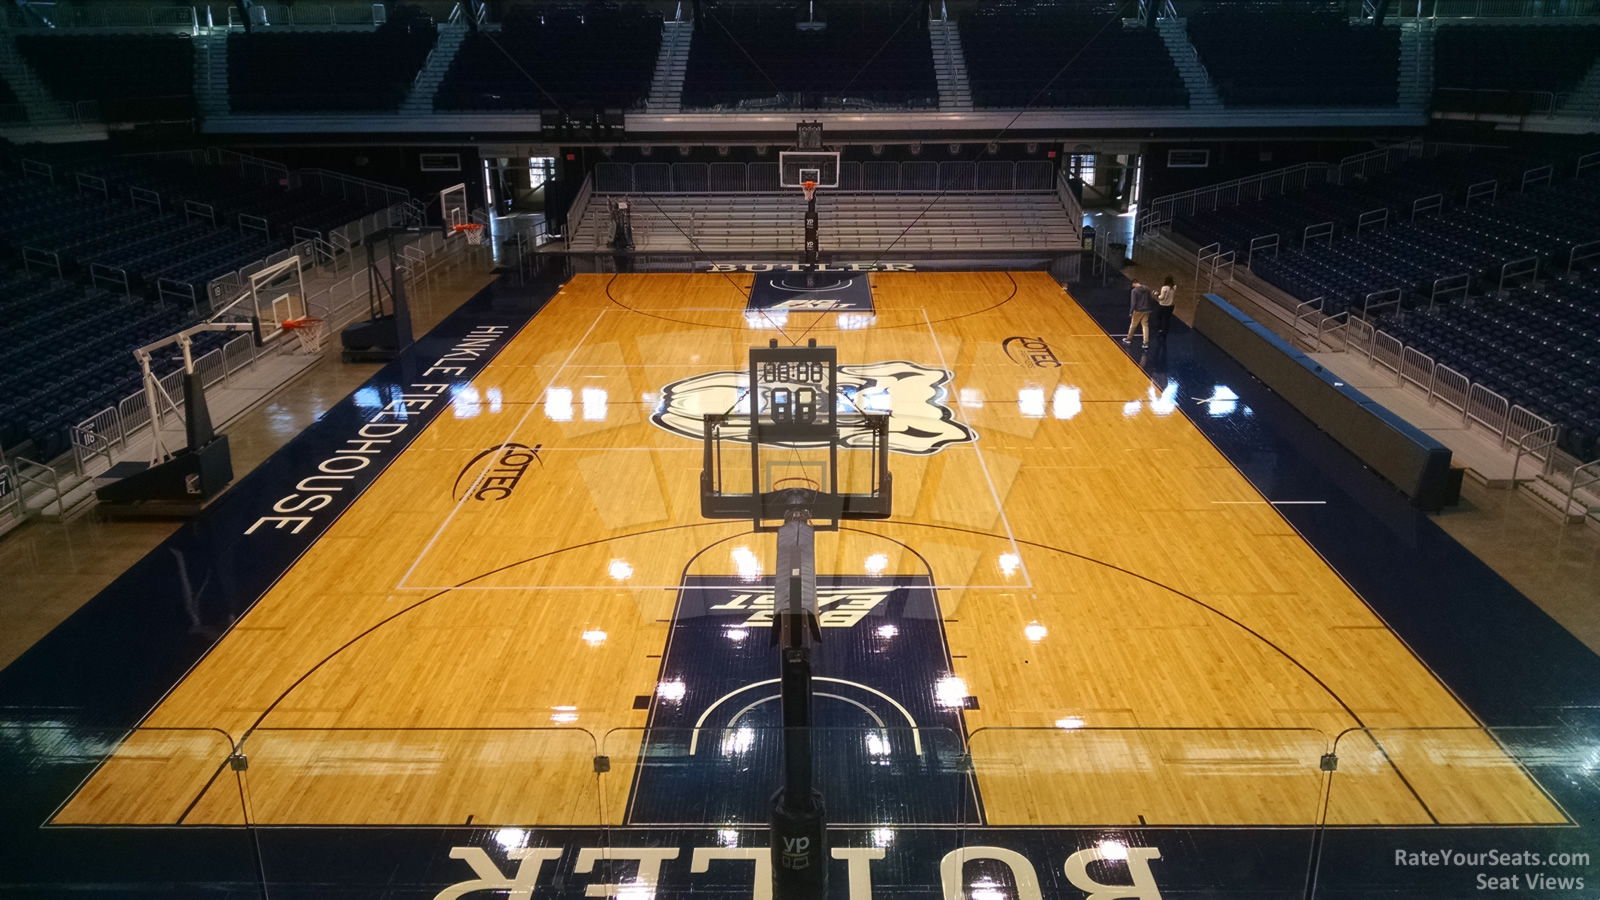 section 212, row 2 seat view  - hinkle fieldhouse